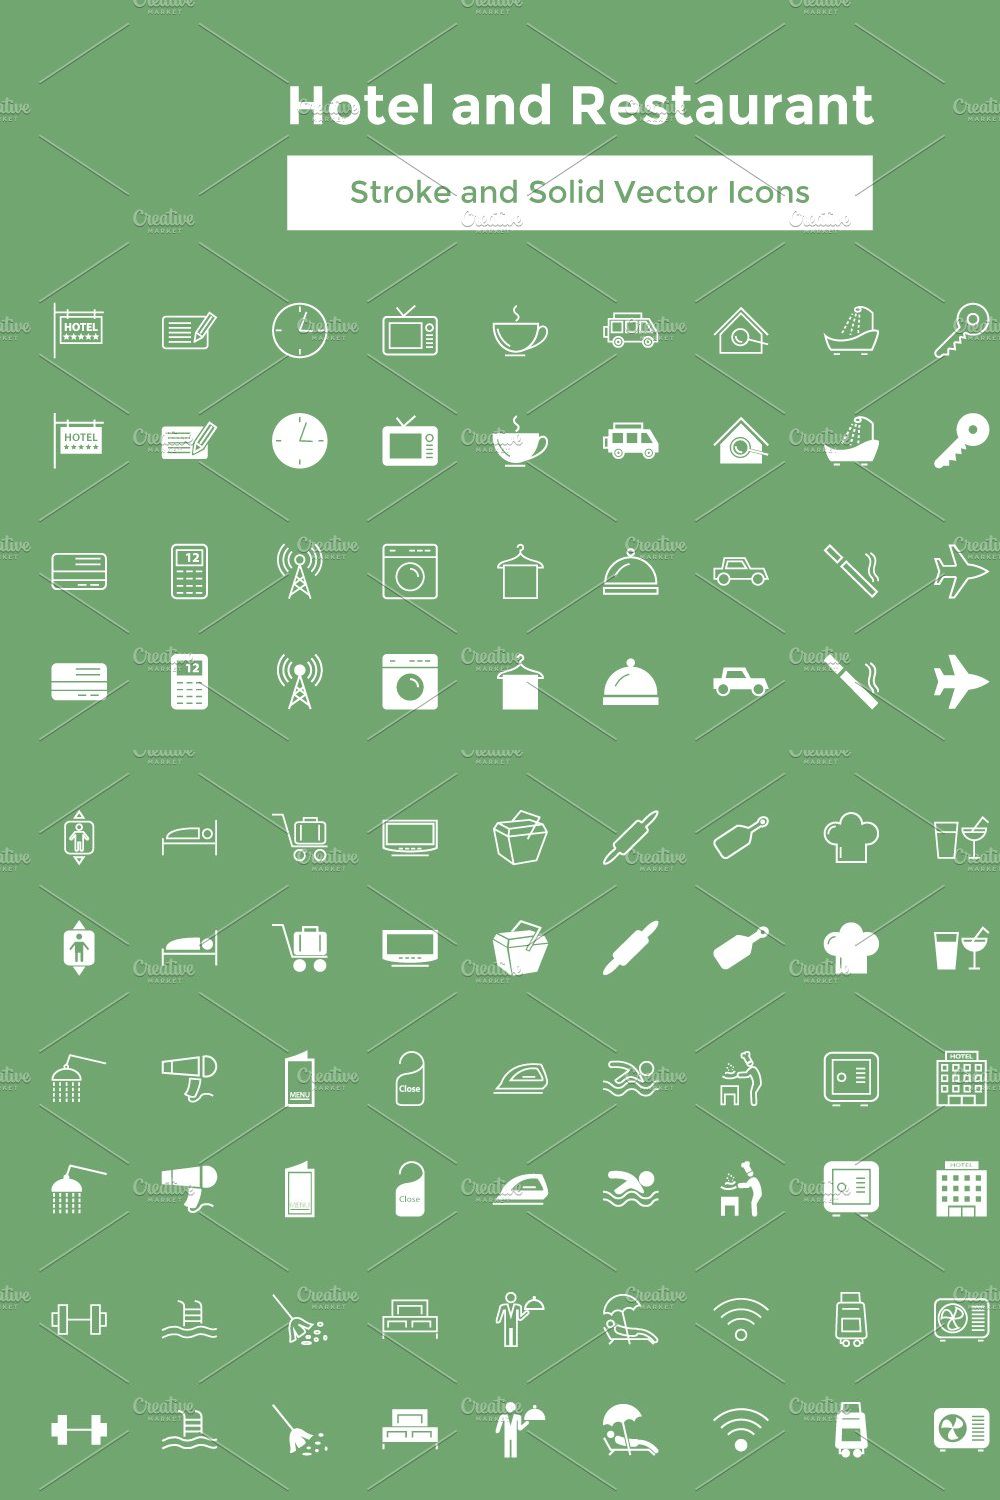 Hotel and Restaurant Vector Icons pinterest preview image.